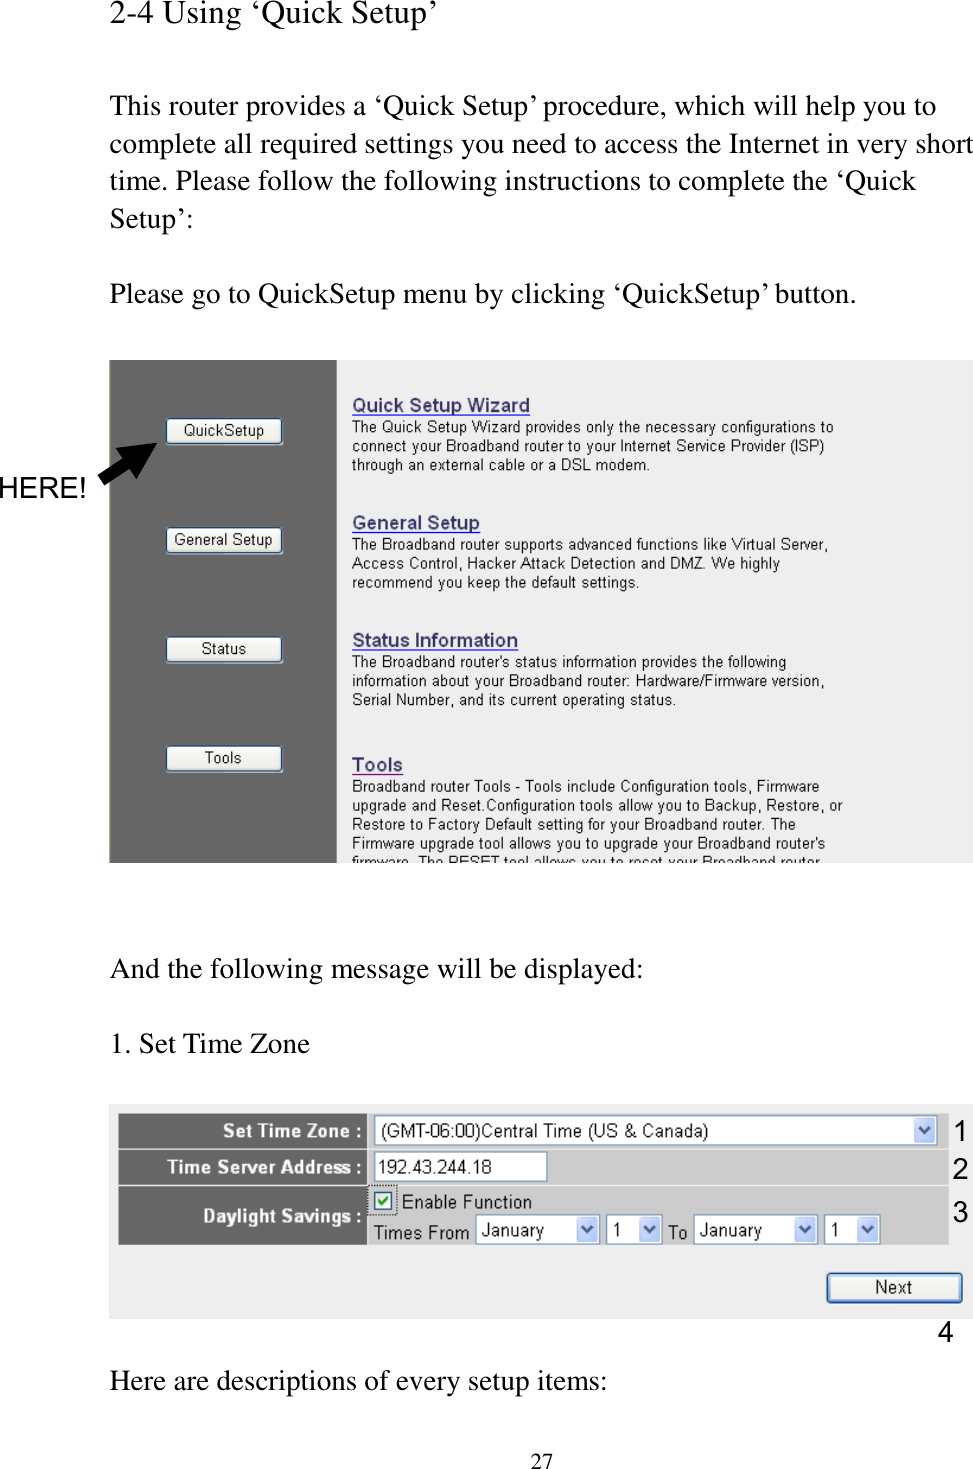 27 2-4 Using „Quick Setup‟  This router provides a „Quick Setup‟ procedure, which will help you to complete all required settings you need to access the Internet in very short time. Please follow the following instructions to complete the „Quick Setup‟:  Please go to QuickSetup menu by clicking „QuickSetup‟ button.     And the following message will be displayed:  1. Set Time Zone    Here are descriptions of every setup items: 1 2 3 4 HERE! 